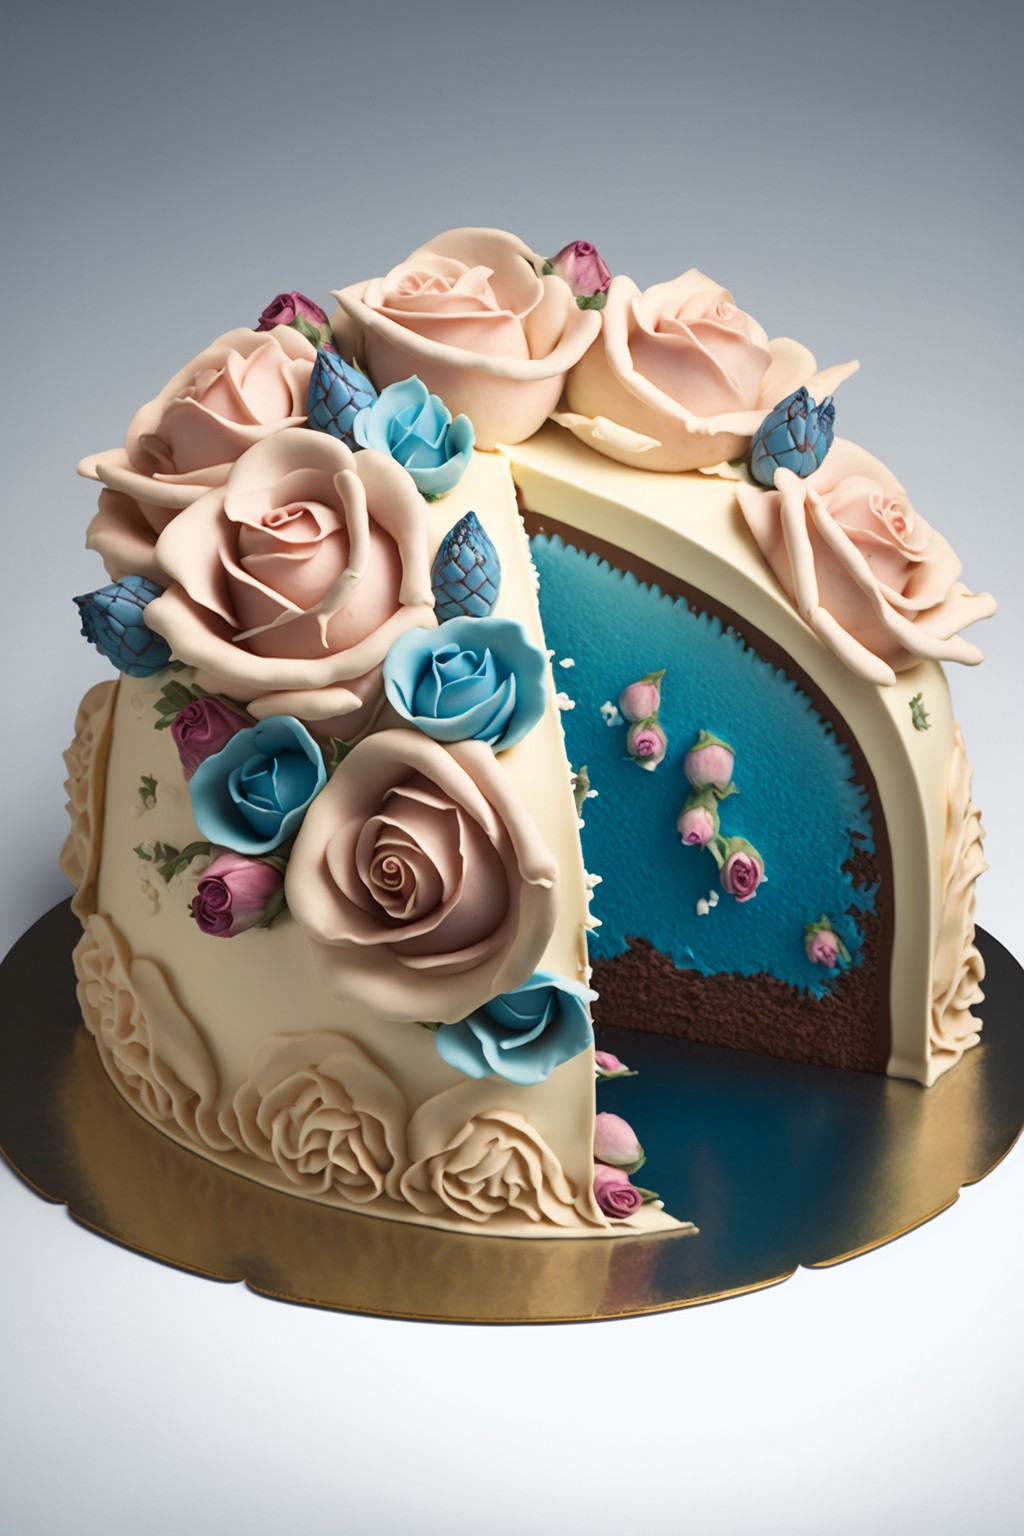 rose cake for you